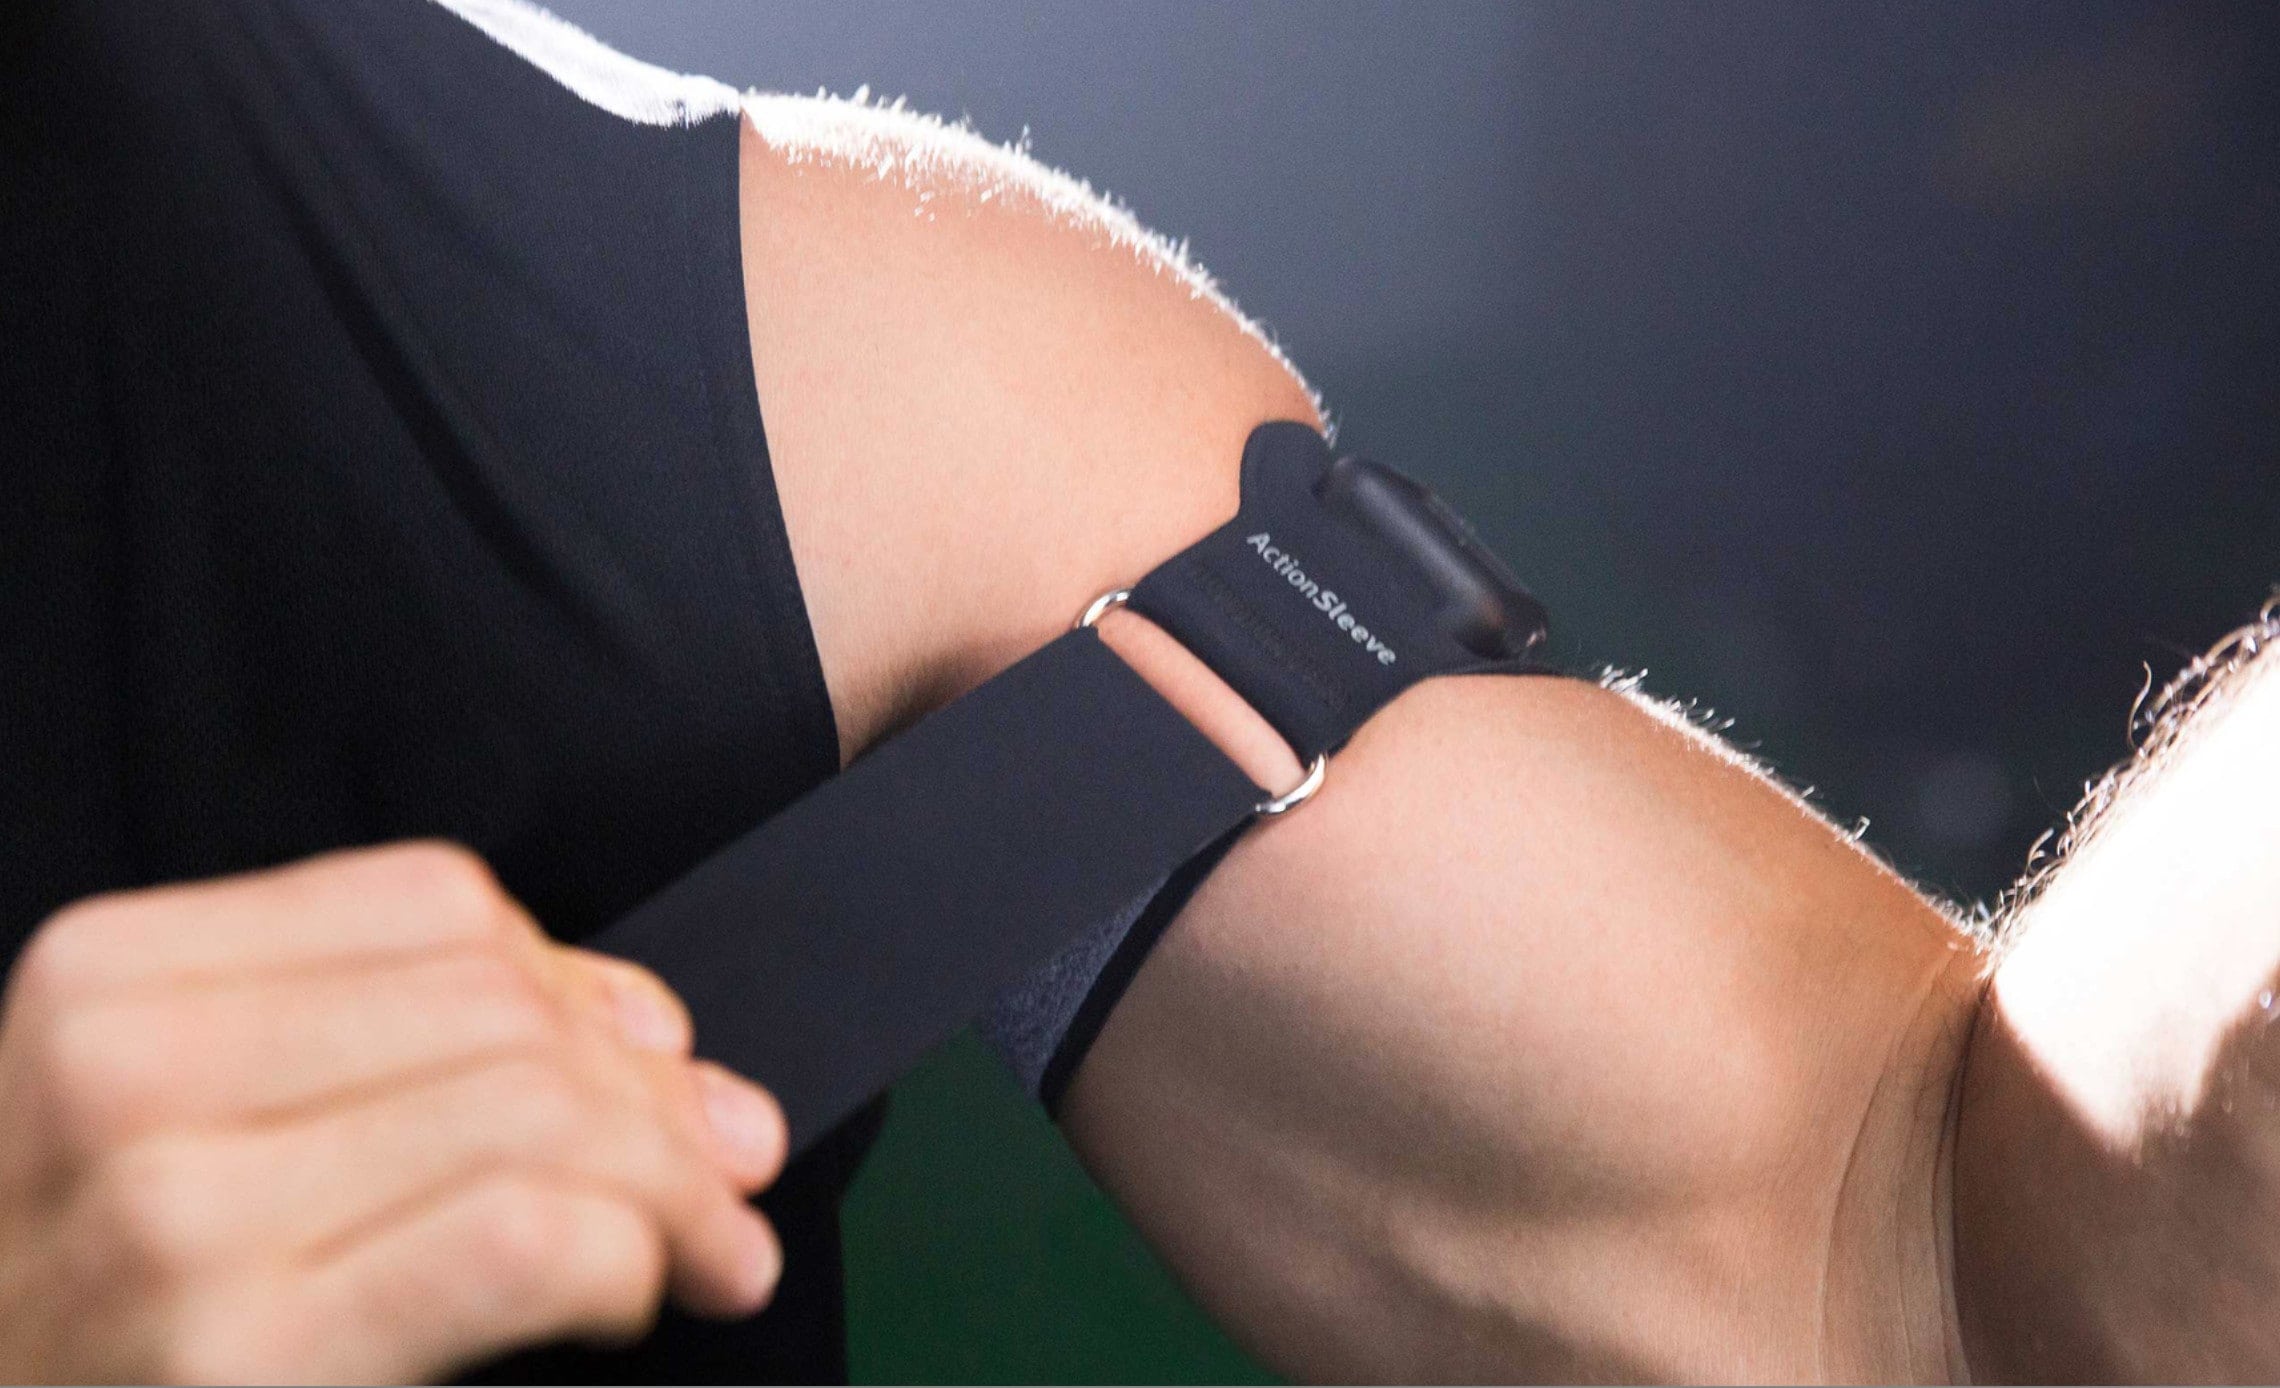 ActionSleeve straps your Apple Watch to your upper arm or bicep, and surrounds the device in rubber to protect it.